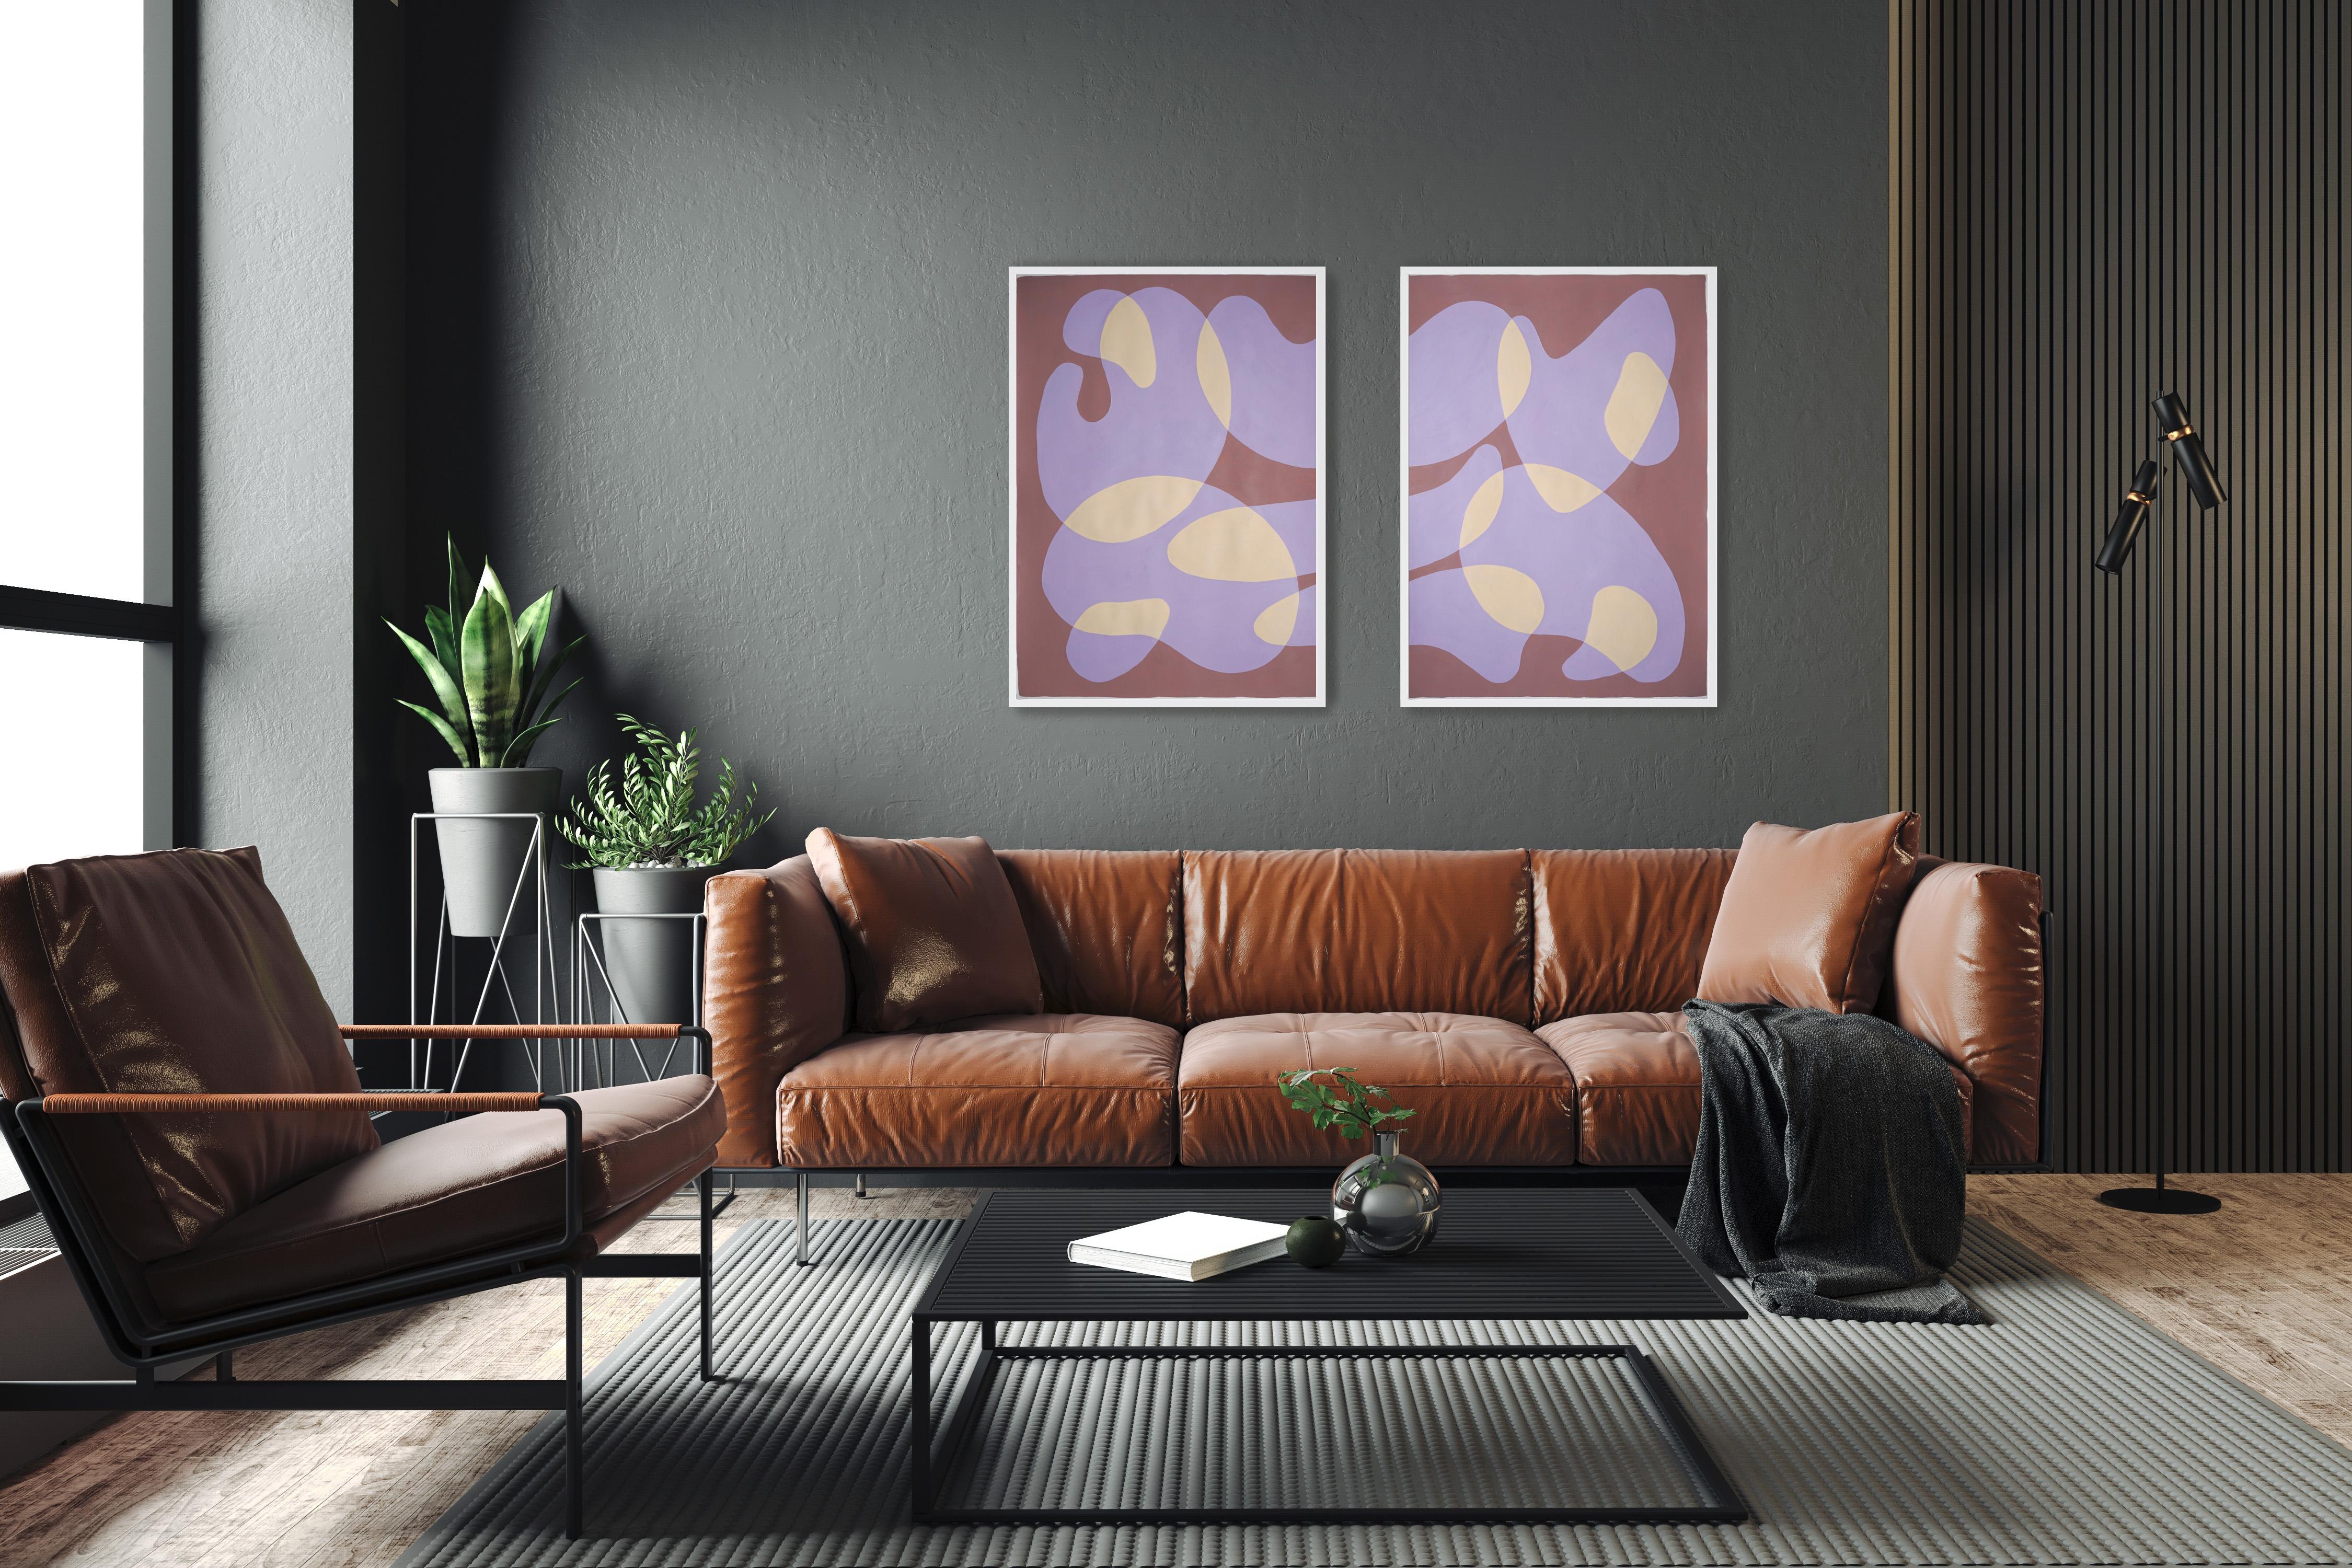 Floating Shapes in Mauve, Mid-Century Modern Abstract Diptych, Coral and Beige  - Painting by Ryan Rivadeneyra